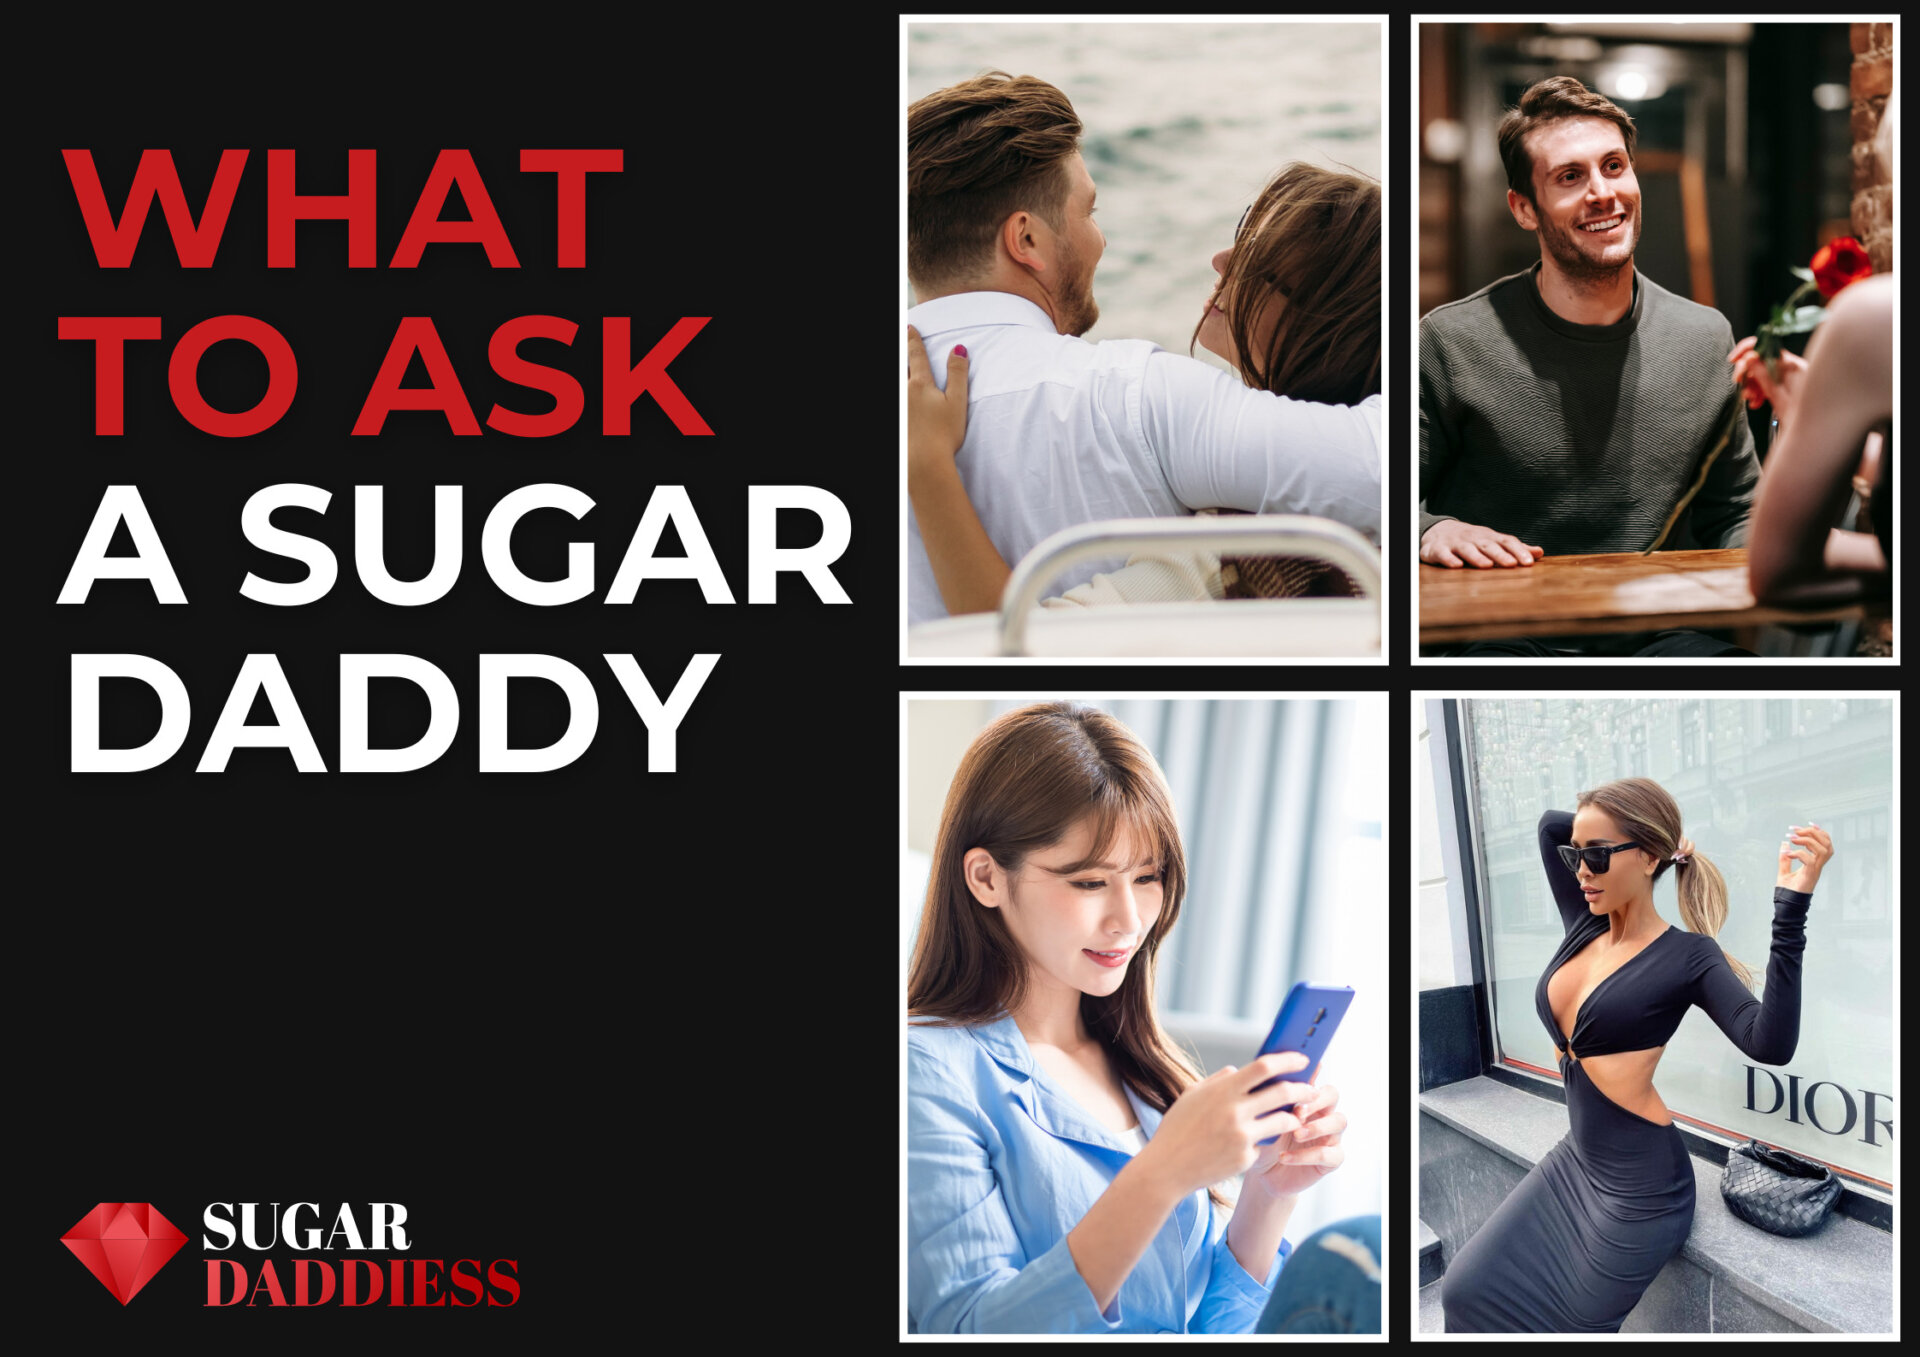 15 Best Questions to Ask Potential Sugar Daddy